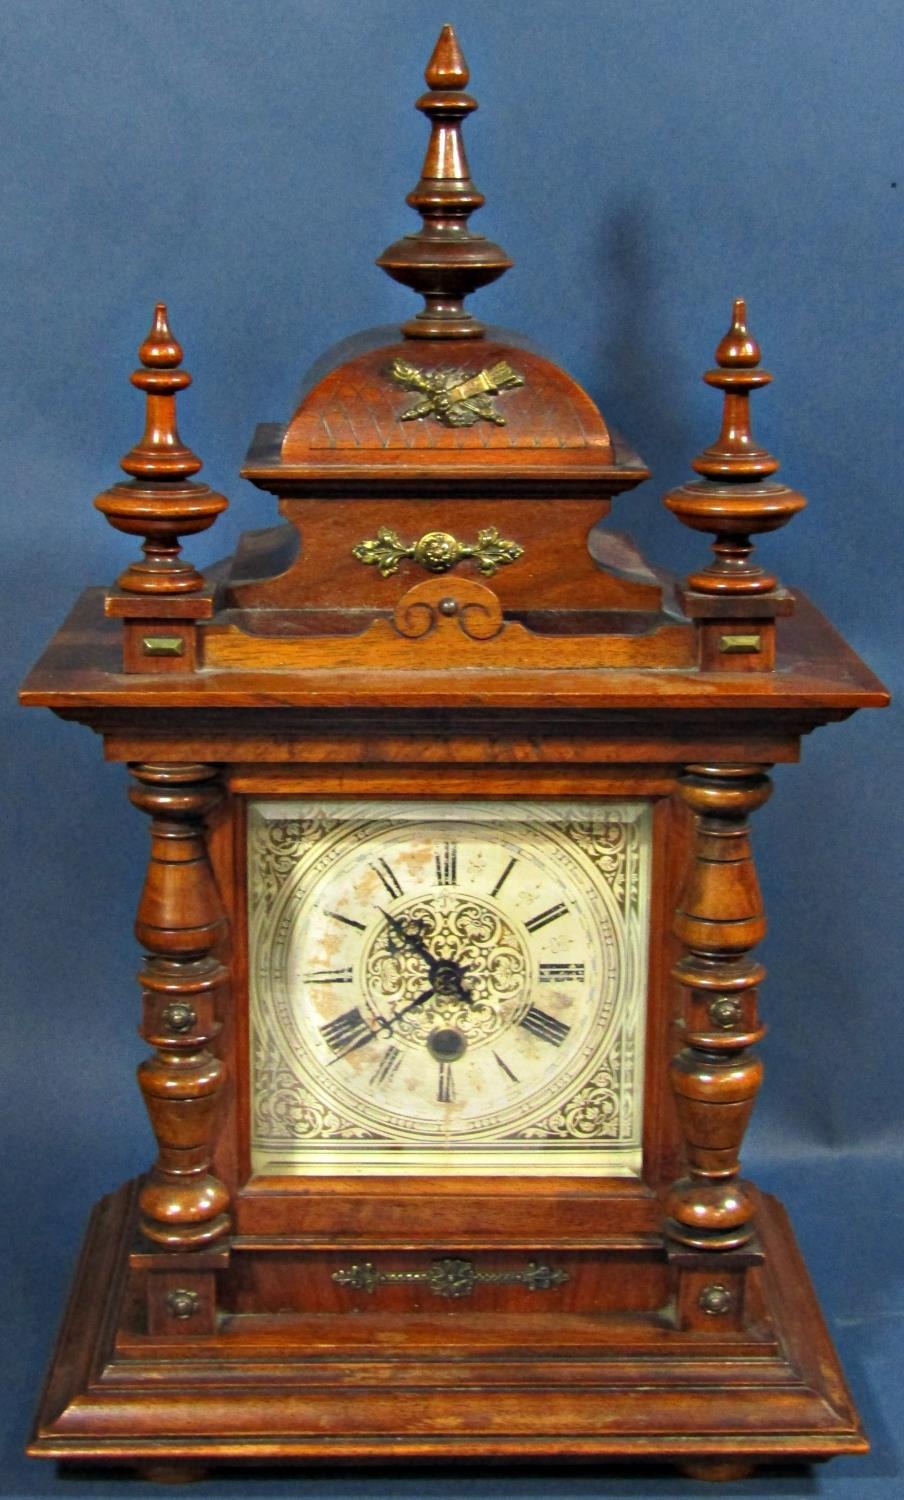 Late 19th century walnut mantle clock, the case of architectural form with turned spindle